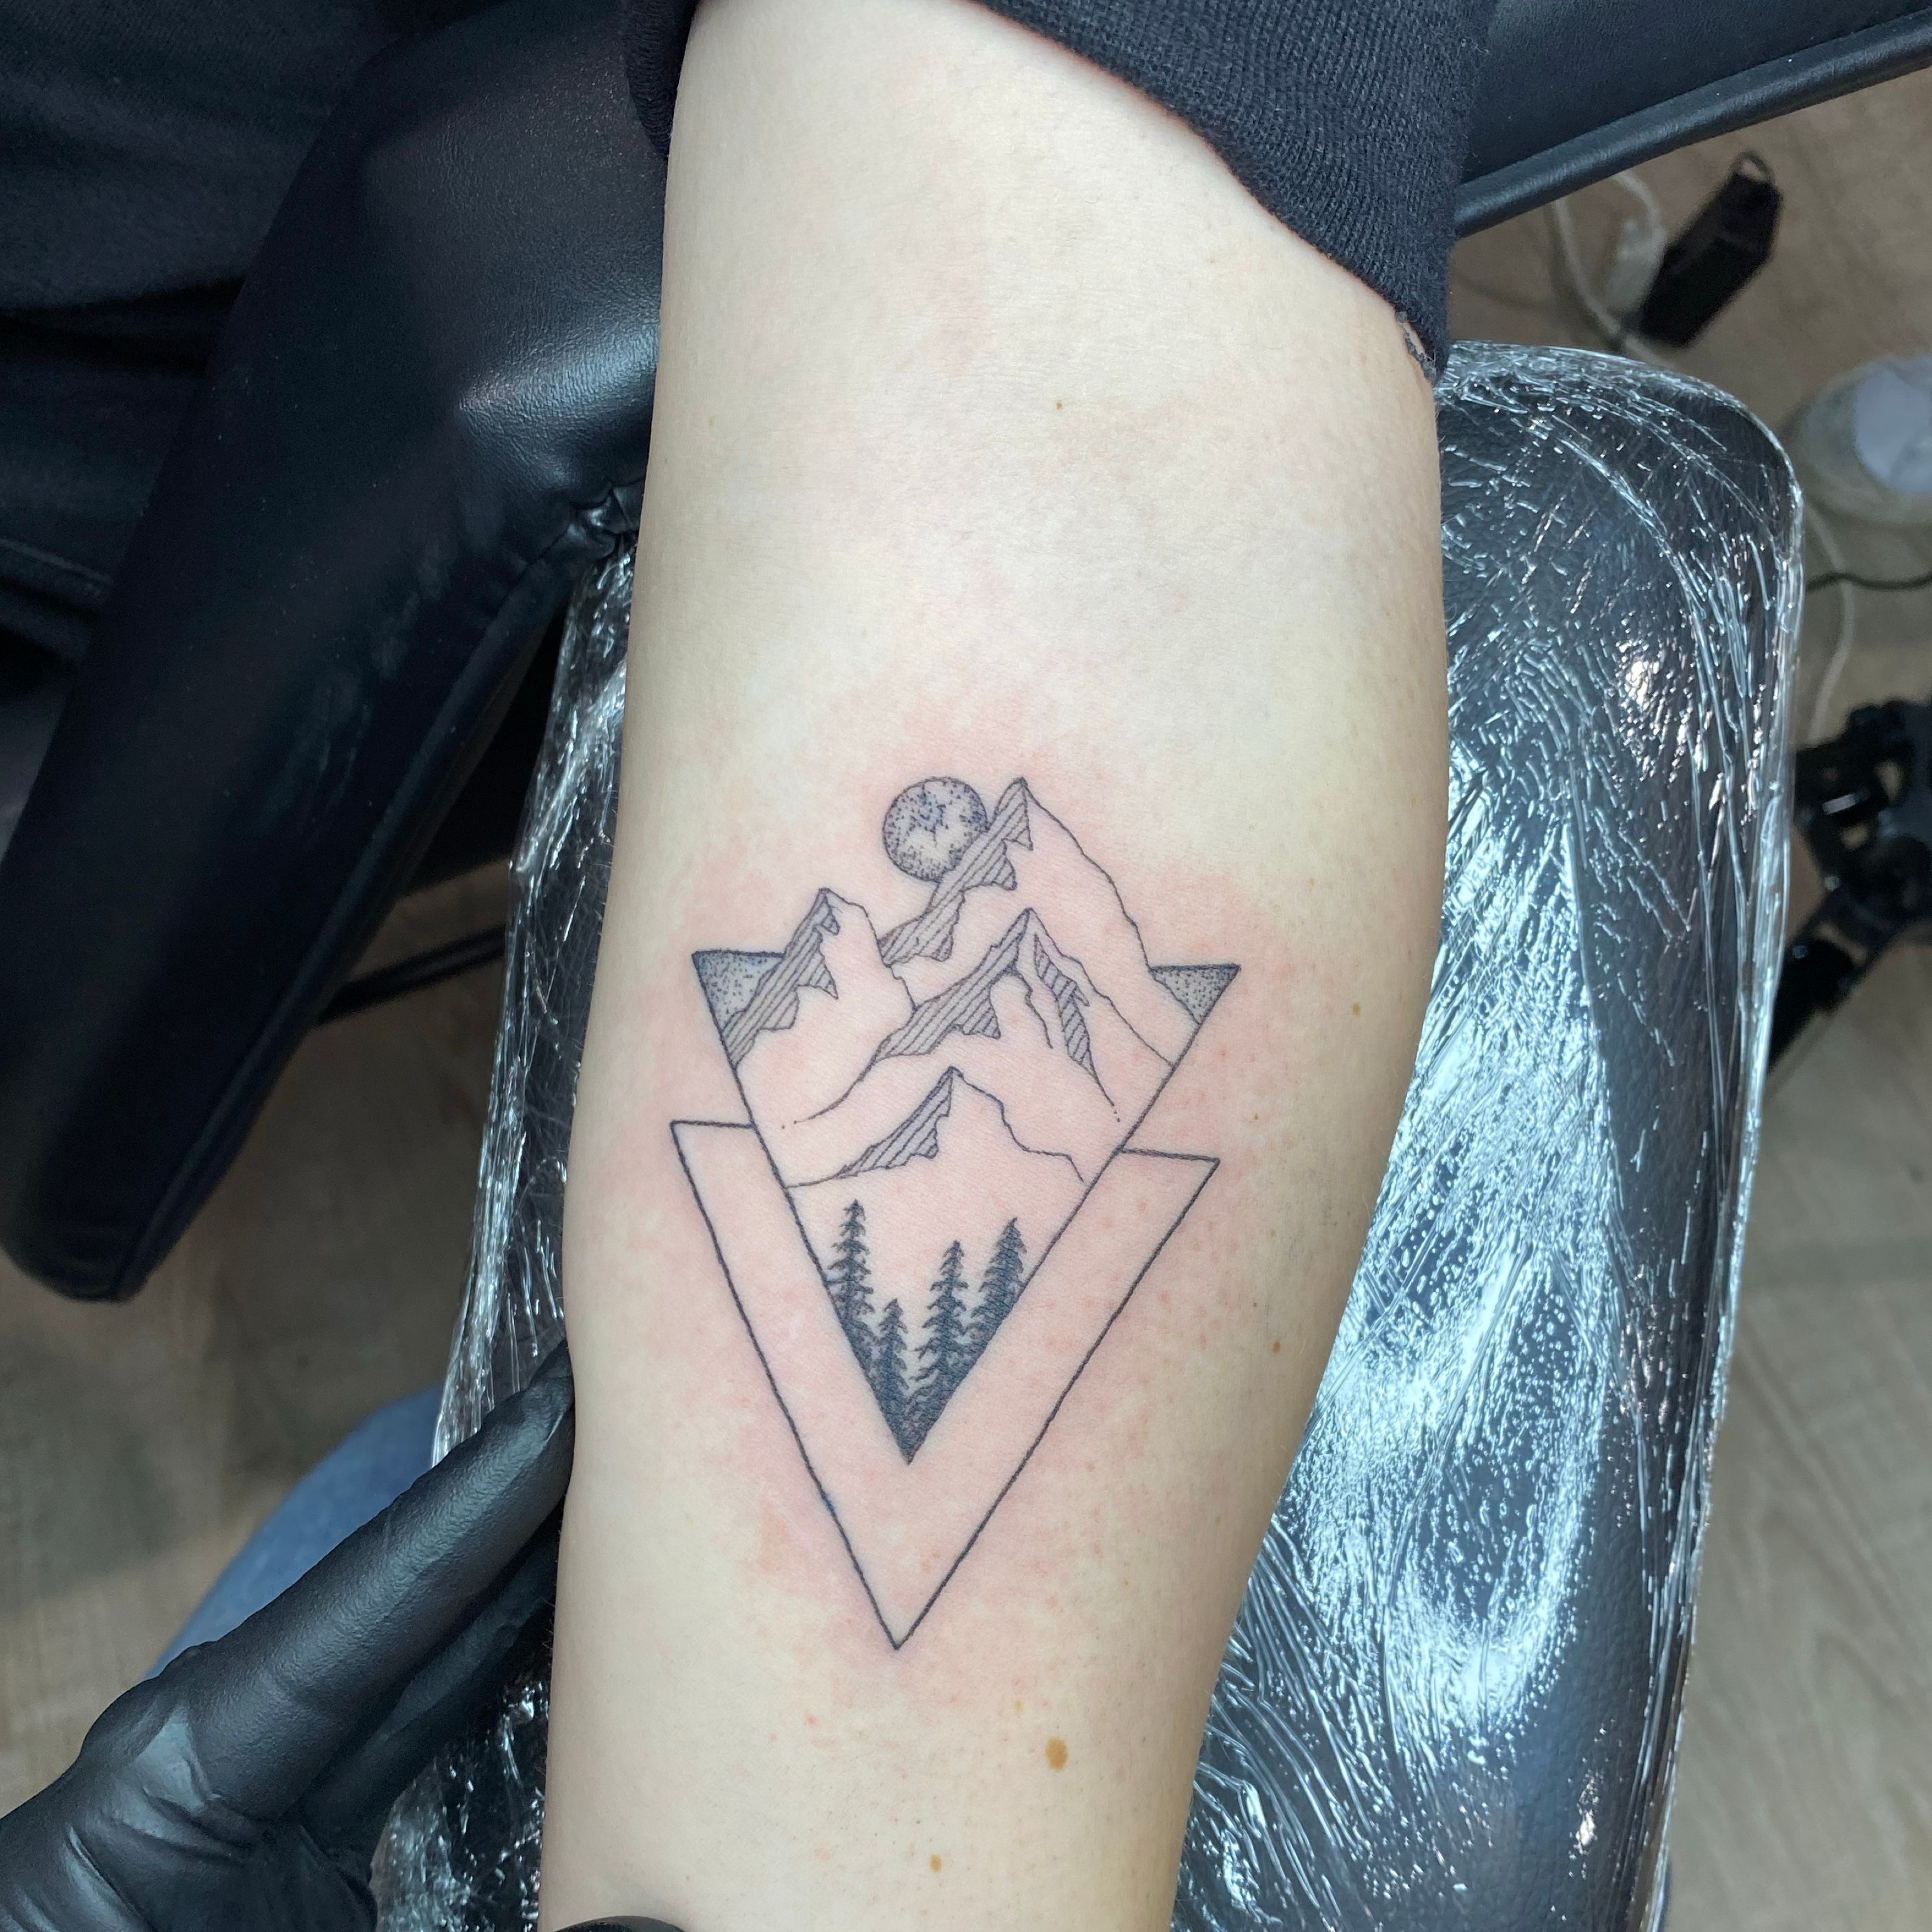 Mountain tattoo located on the inner forearm.